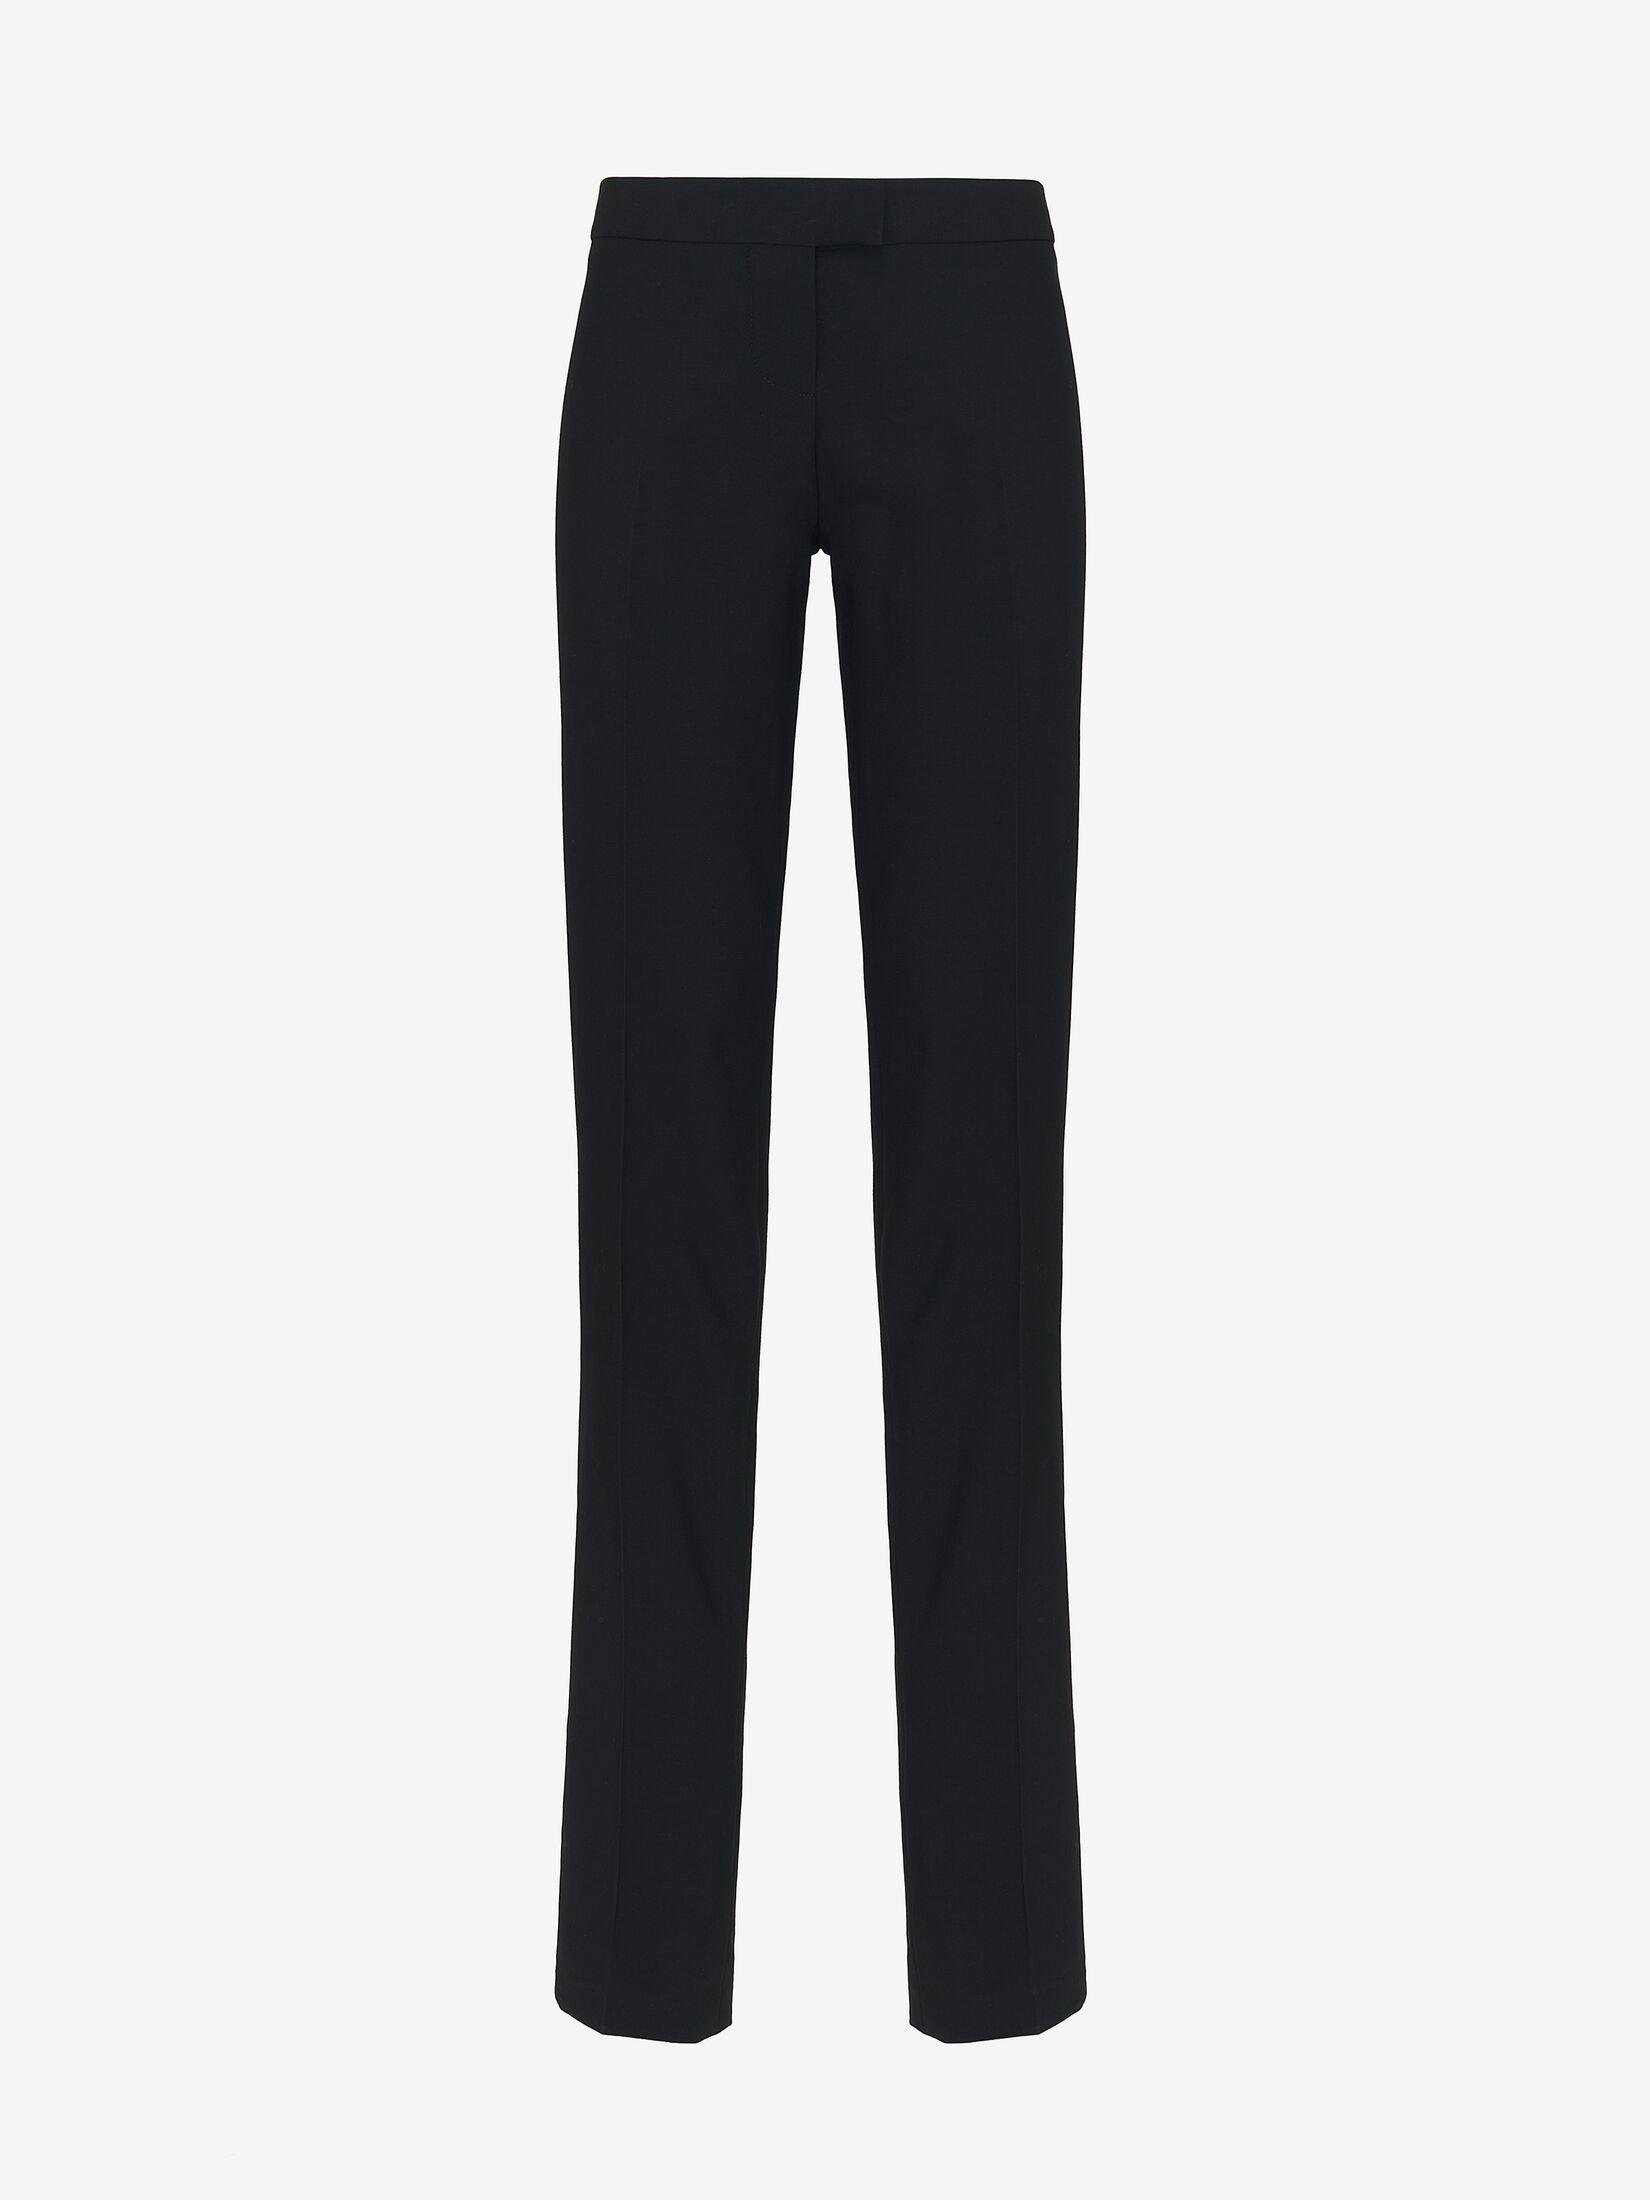 Low-waisted Straight Leg Trousers by ALEXANDER MCQUEEN